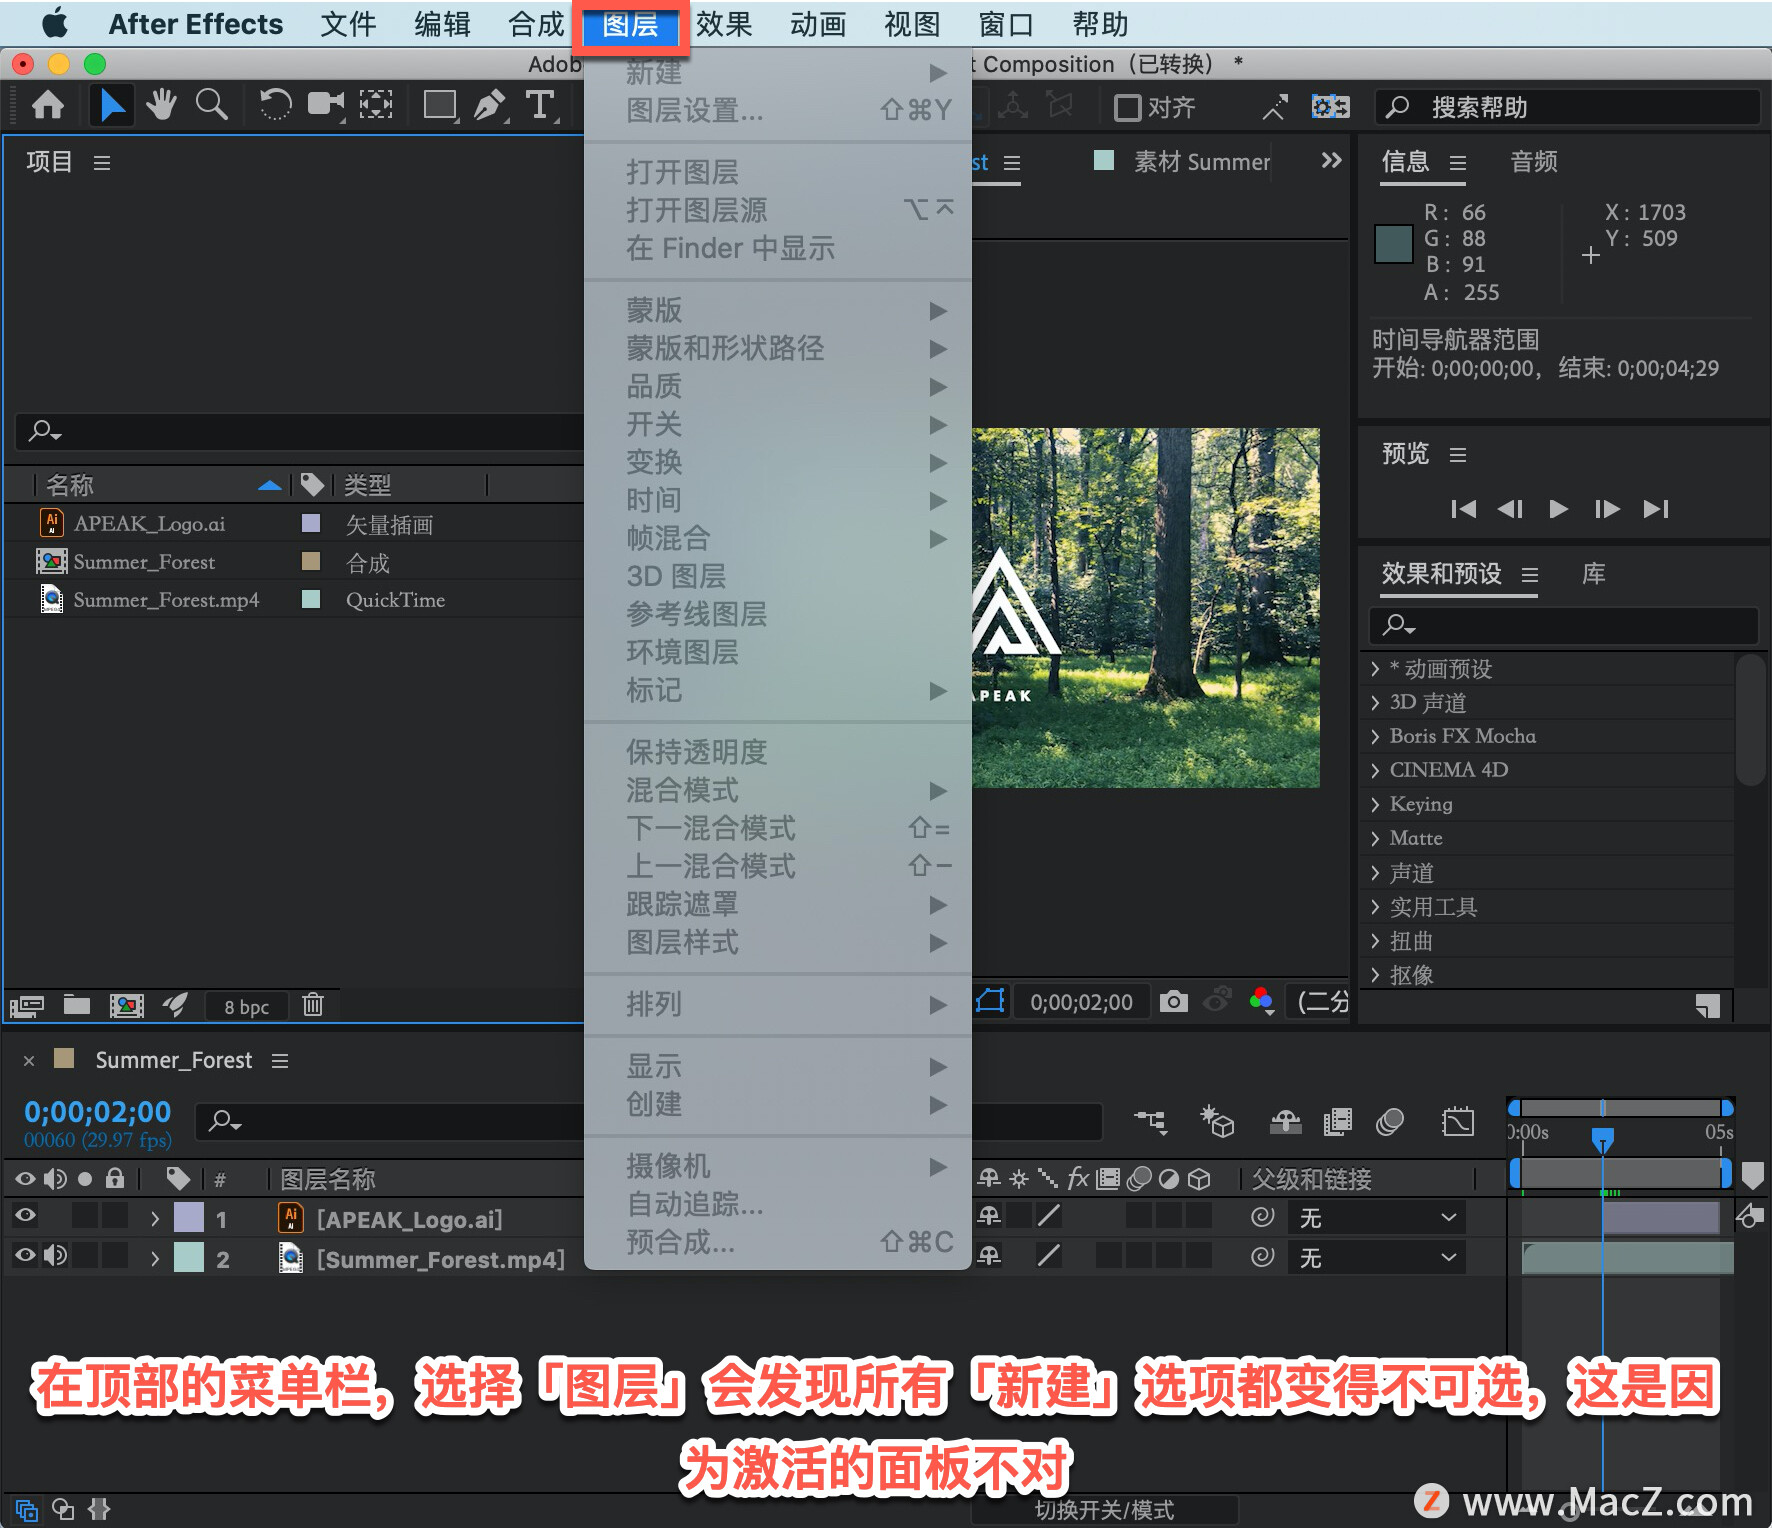 After Effects 教程「6」，如何在 After Effects 中添加渐变颜色？